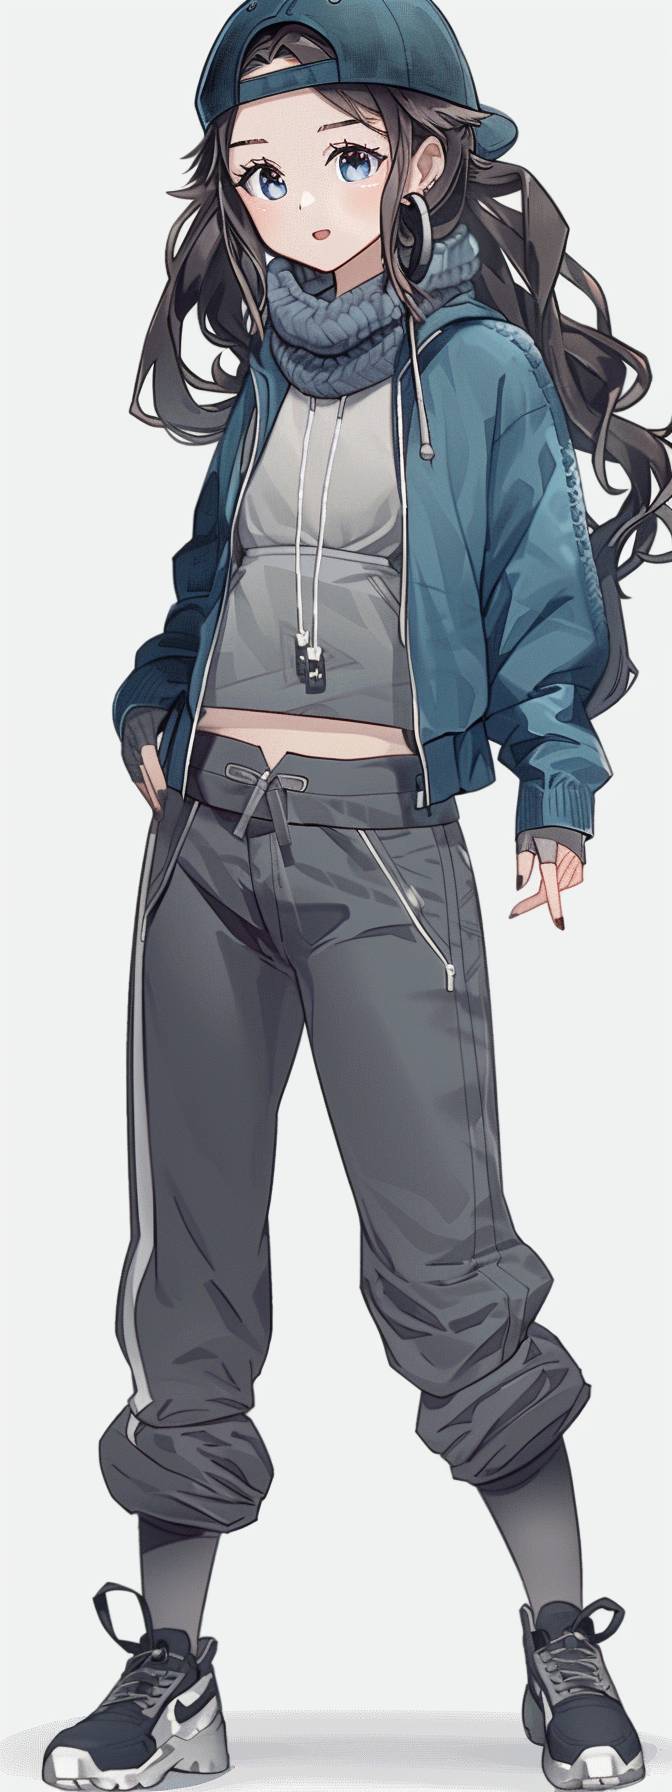 An anime little girl wearing an outfit with sleeves and pants in the style of Alex Hirsch, light indigo and dark gray, close-up intensity, Mike Judge, Normcore, Pigeoncore, Matti Suuronen, cute mobile game style